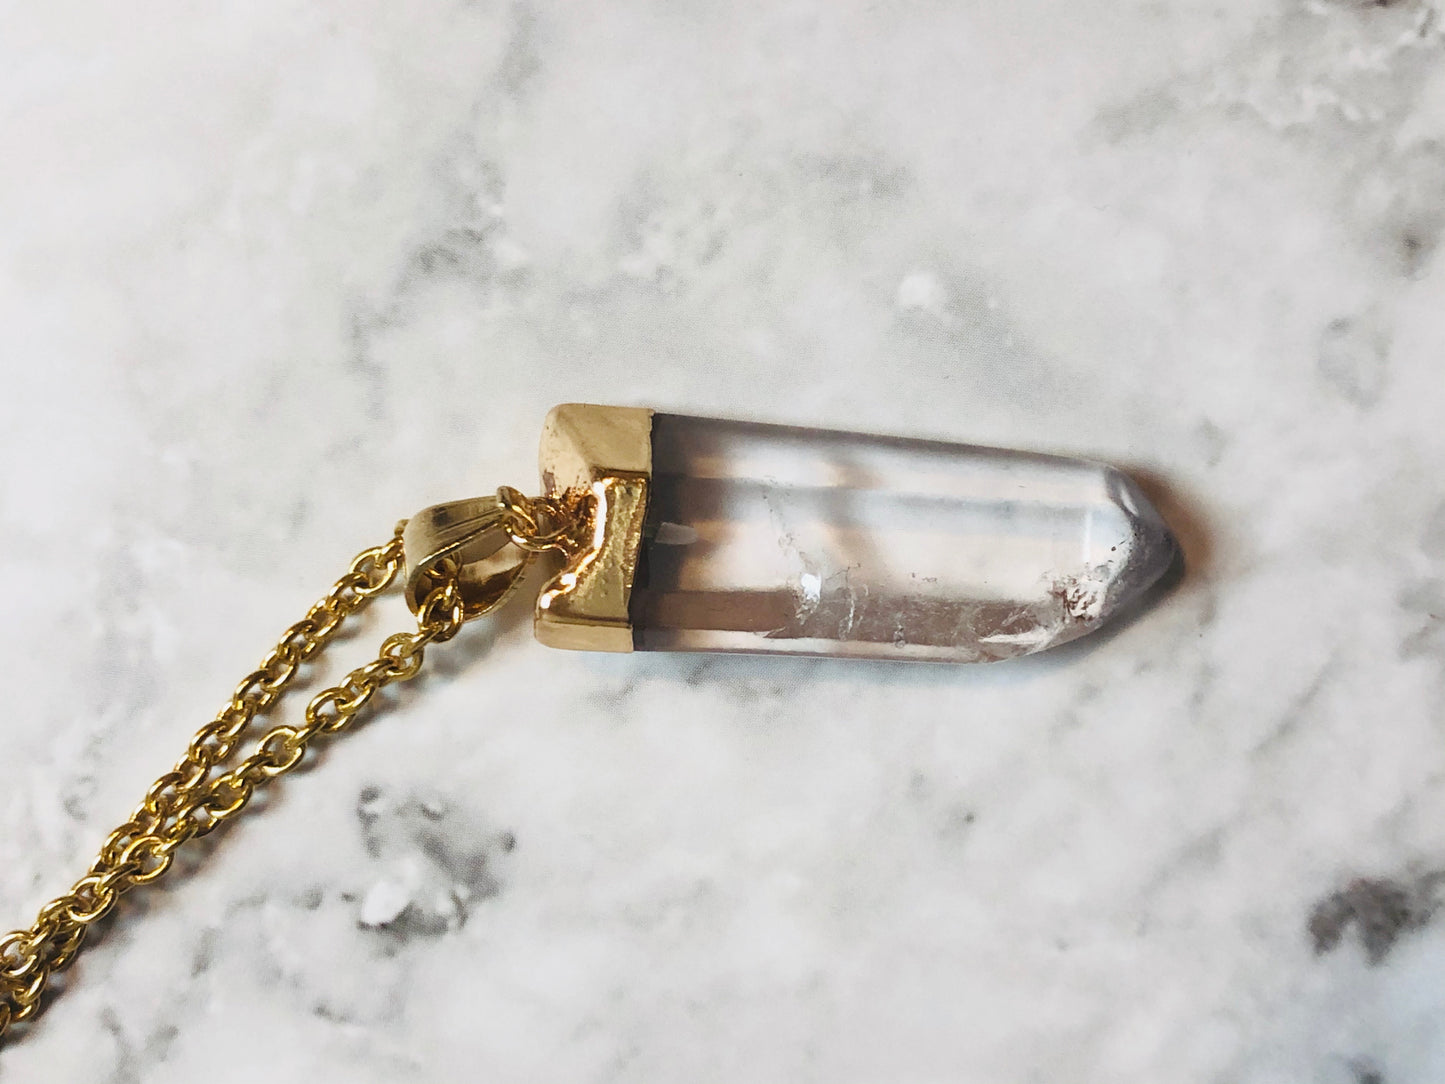 Clear Quartz Necklace With Gold Accent